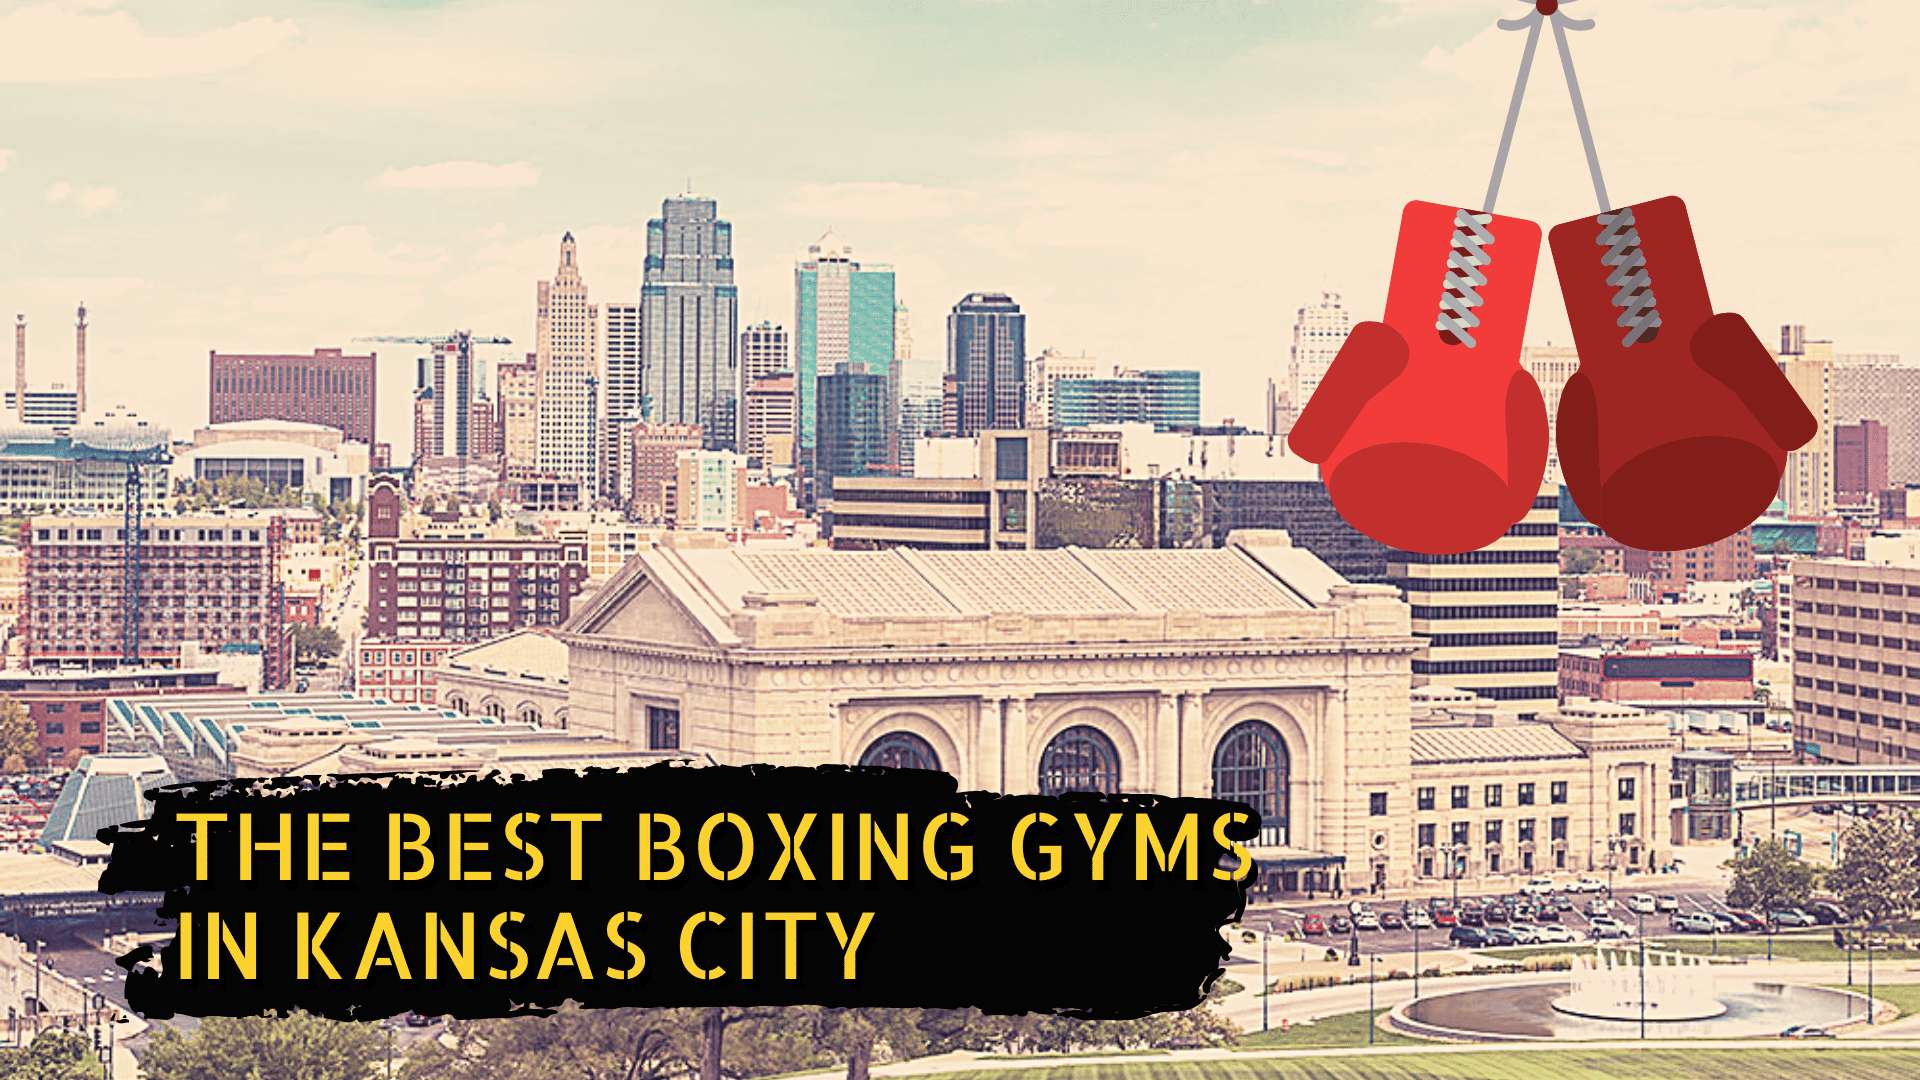 Kansas City skyline, some boxing gloves and a title that says the best boxing gyms in Kansas City